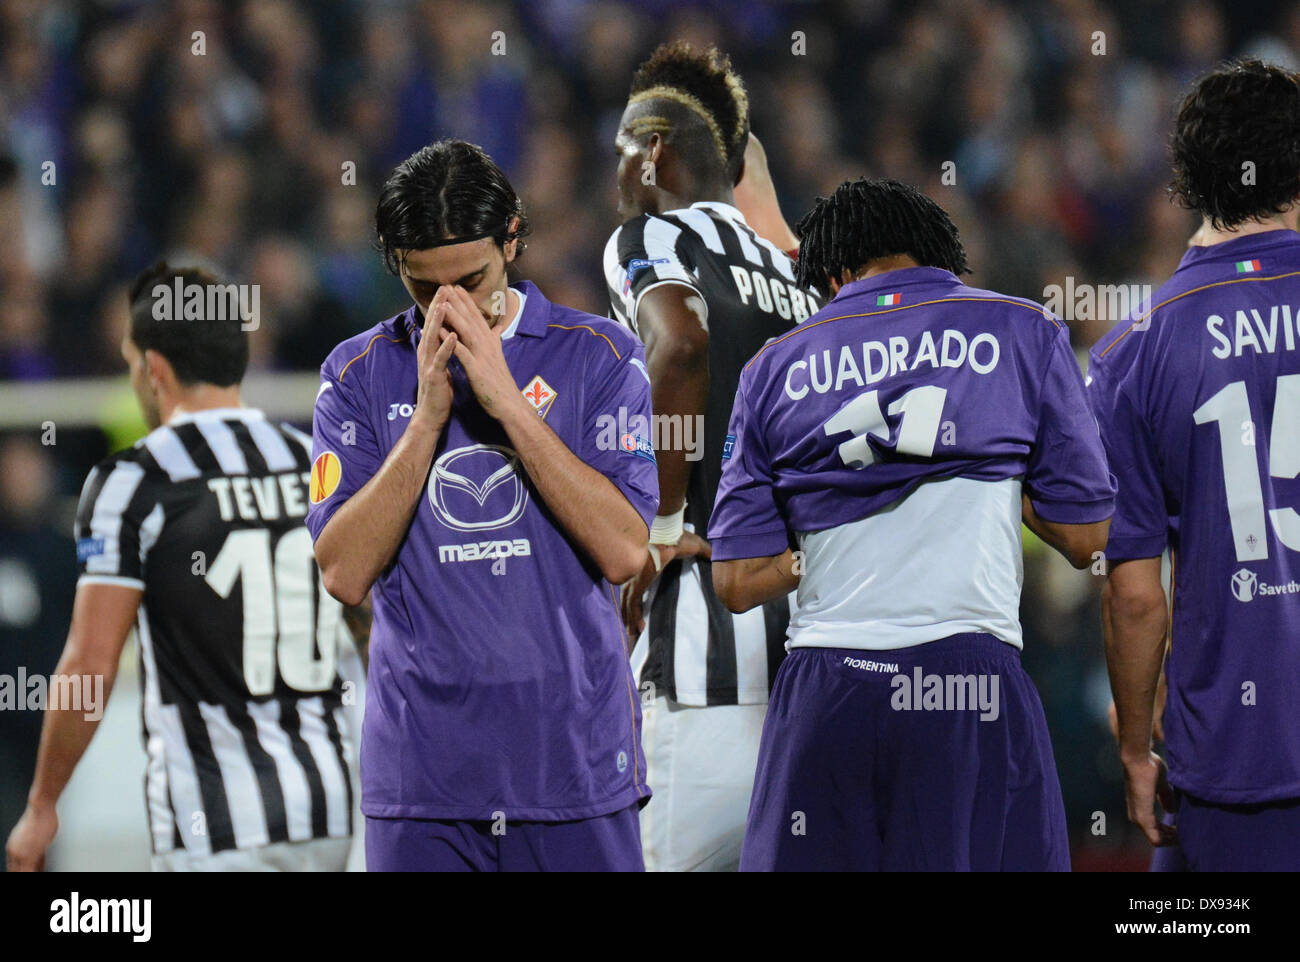 Florence, Italy. 20th Mar, 2014. Alberto Aquilani (Fiorentina) during the Uefa football match between AC Fiorentina and Juventus at Artemio Franchi, in Florence, Italy, on March 20, 2014. Credit:  Federica Roselli/NurPhoto/ZUMAPRESS.com/Alamy Live News Stock Photo